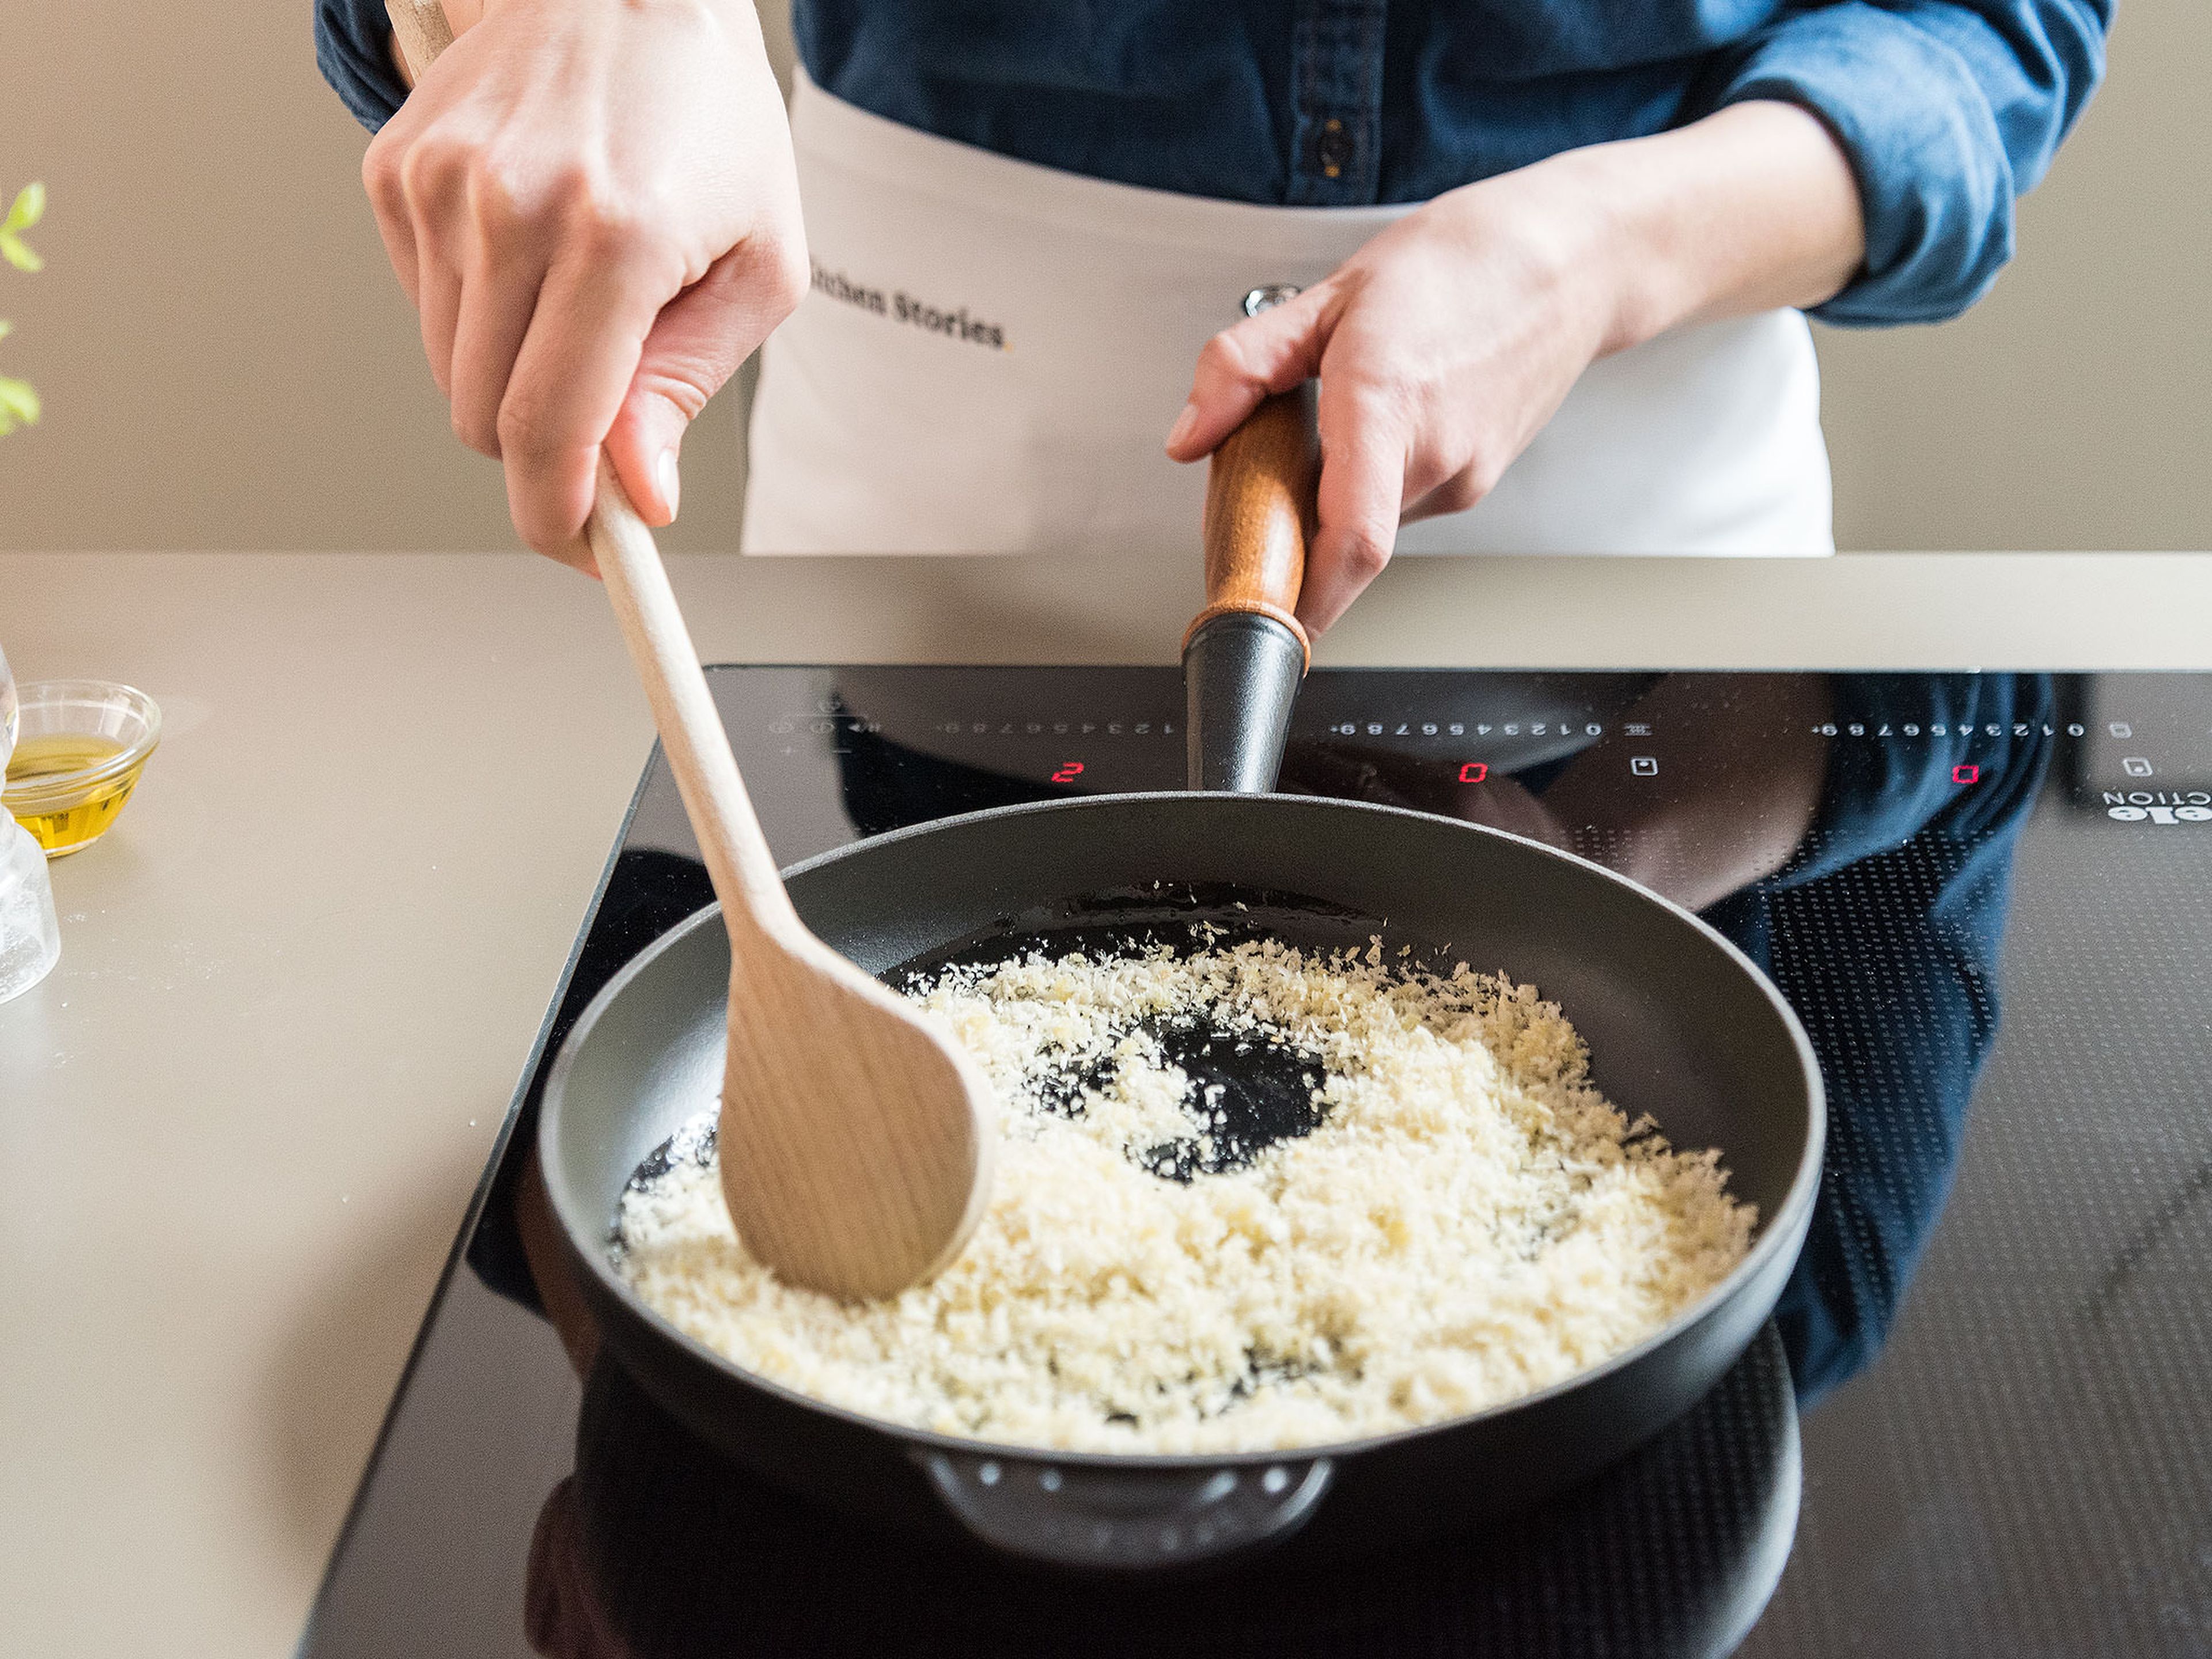 Heat olive oil in a frying pan, add panko and toast for approx. 2 – 3 min. until golden brown. Set aside.